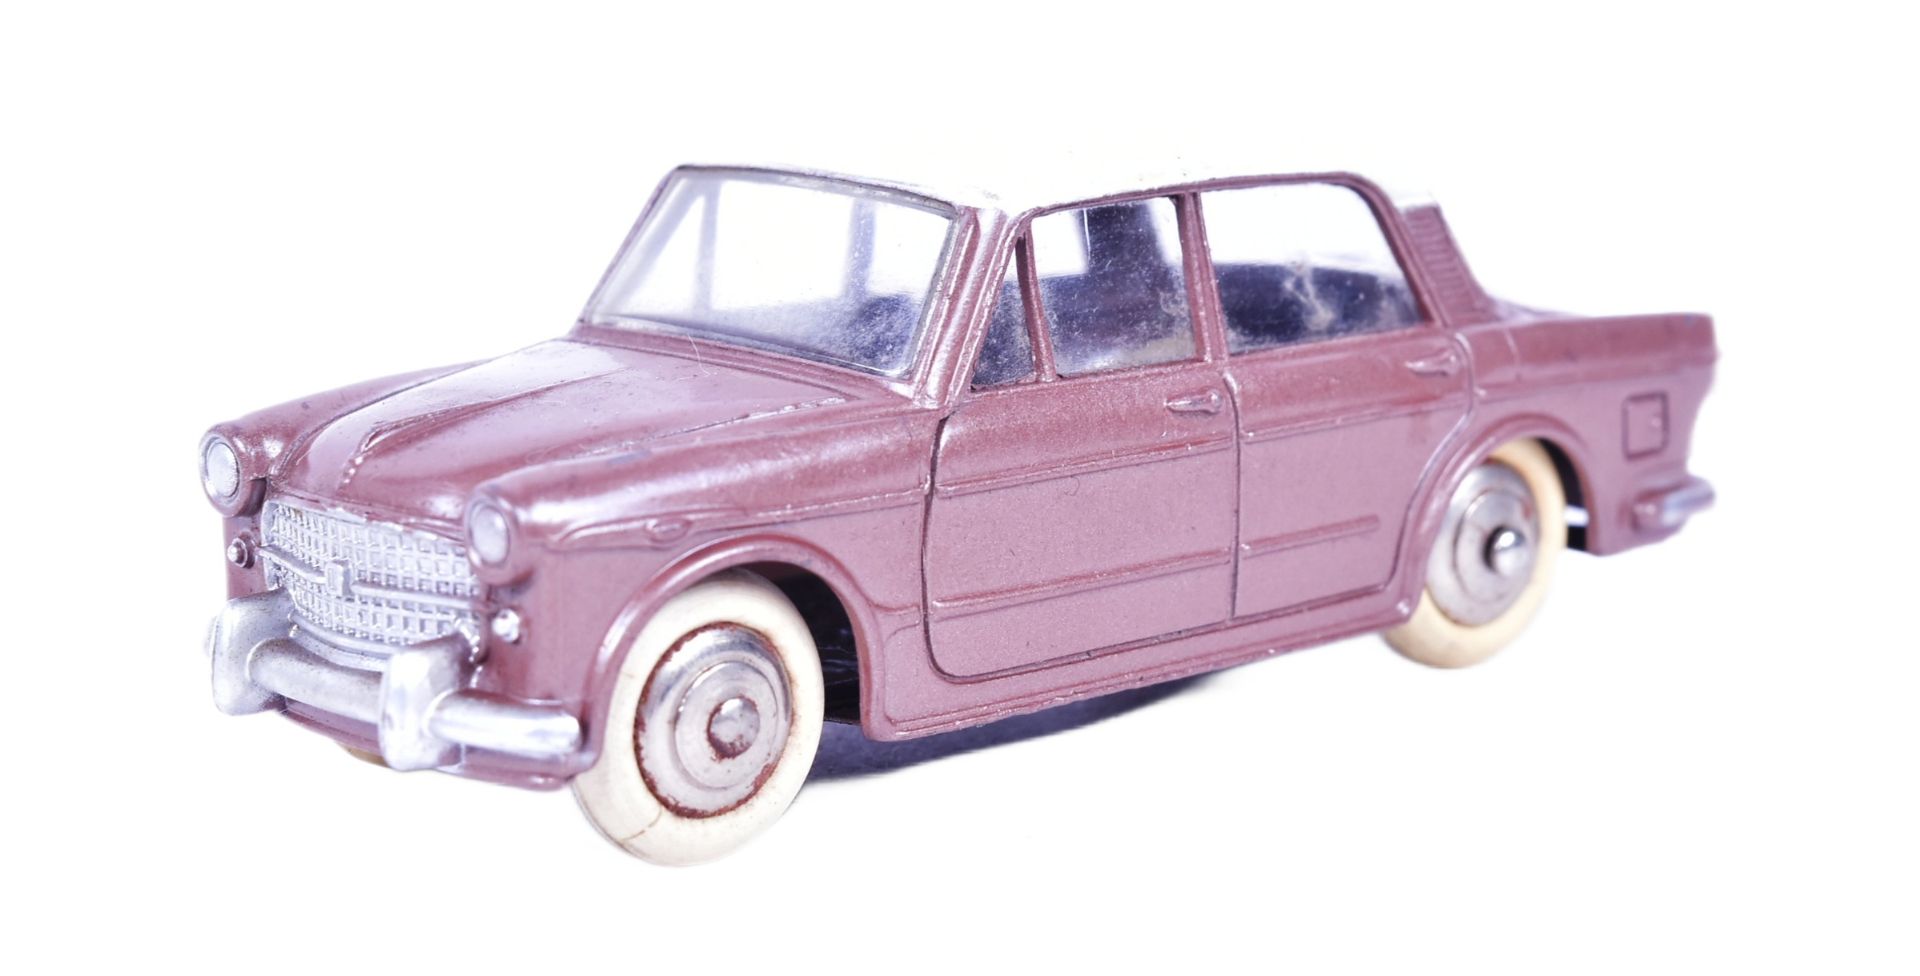 DIECAST - FRENCH DINKY TOYS - GRANDE VUE FIAT 1200